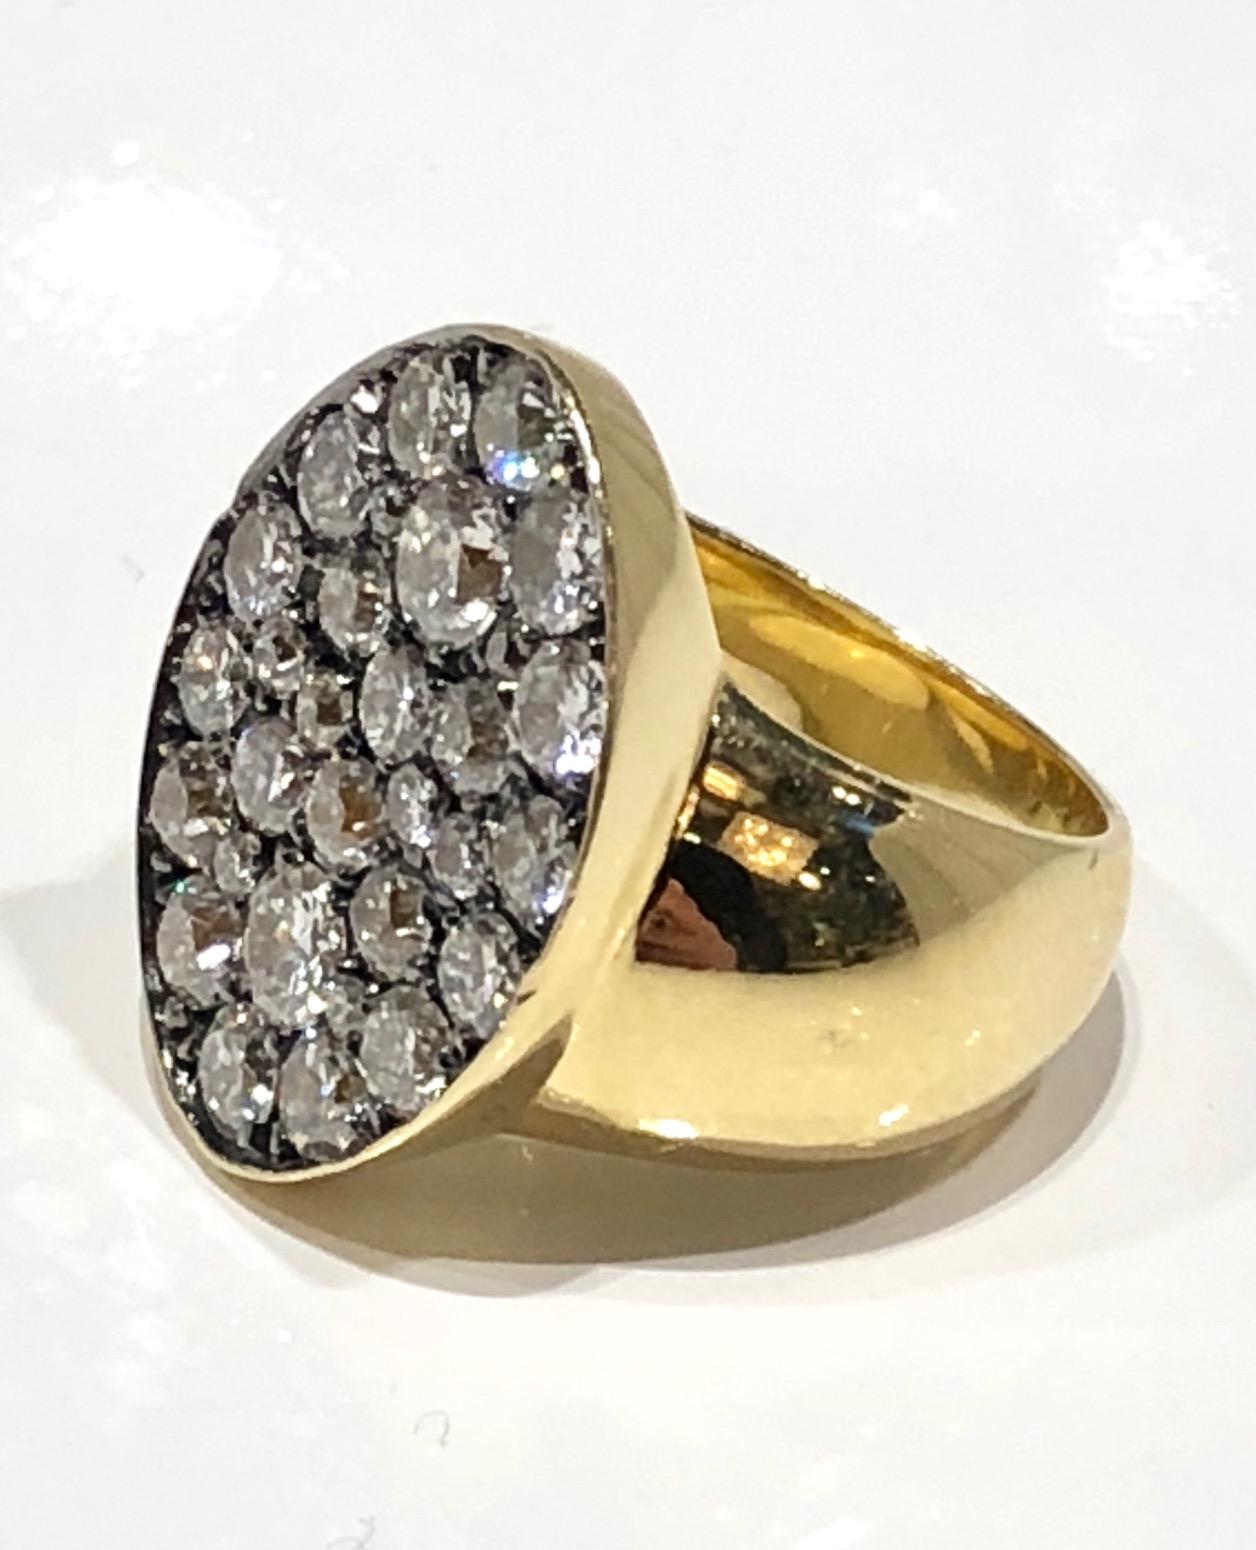 Unisex 18k yellow gold Signet Ring, sheild shape pave set old cut diamond face
Made by Martyn Lawrence Bullard
Can be made in rose or white gold, any size, lead time 4 weeks